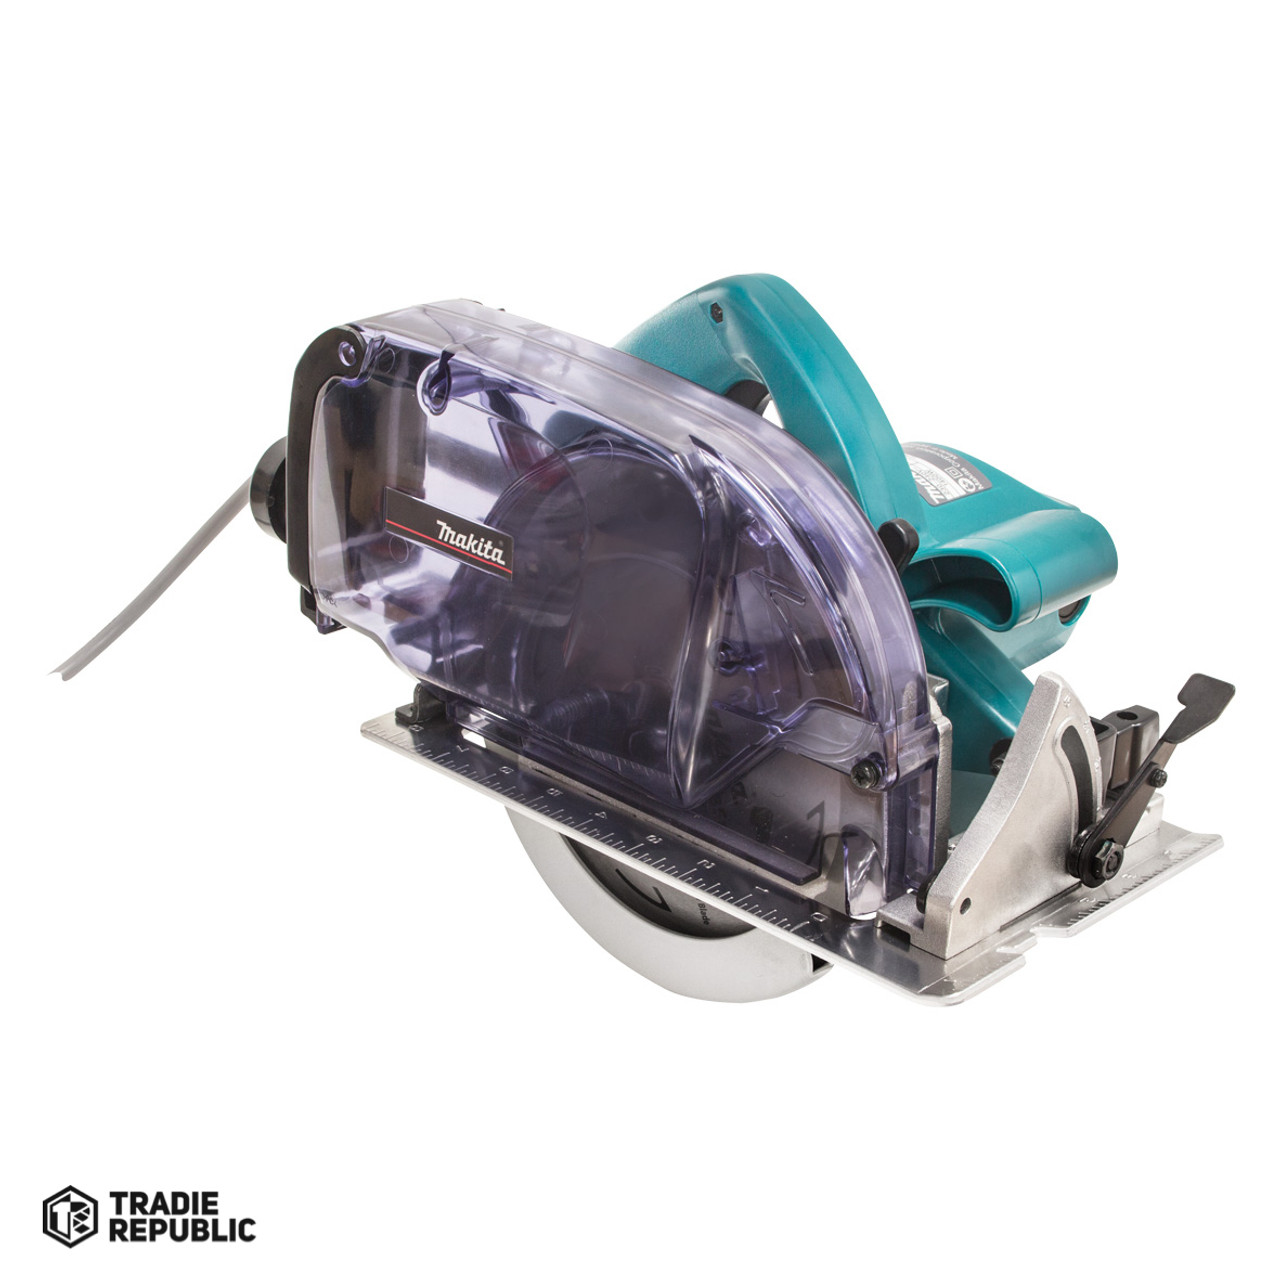 5057KB Makita 185mm Circular Saw, with Dust Collector